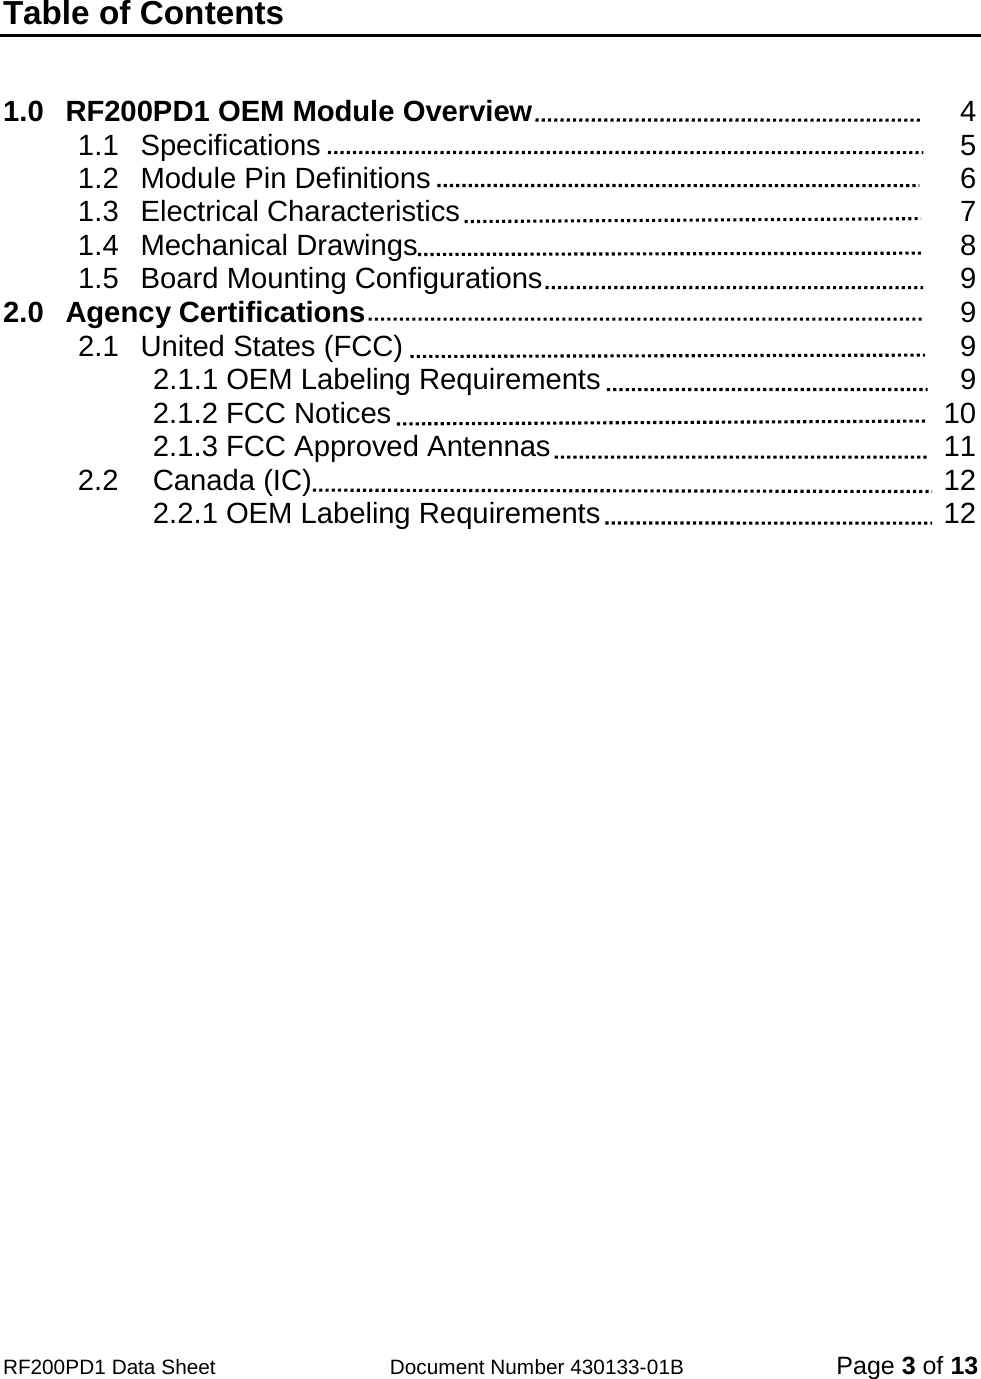                                            RF200PD1 Data Sheet                  Document Number 430133-01B  Page 3 of 13  Table of Contents      1.0 RF200PD1 OEM Module Overview            4 1.1 Specifications               5 1.2 Module Pin Definitions              6 1.3 Electrical Characteristics             7 1.4 Mechanical Drawings              8 1.5 Board Mounting Configurations            9 2.0 Agency Certifications               9 2.1 United States (FCC)              9  2.1.1 OEM Labeling Requirements            9  2.1.2 FCC Notices            10  2.1.3 FCC Approved Antennas          11 2.2 Canada (IC)             12  2.2.1 OEM Labeling Requirements          12    